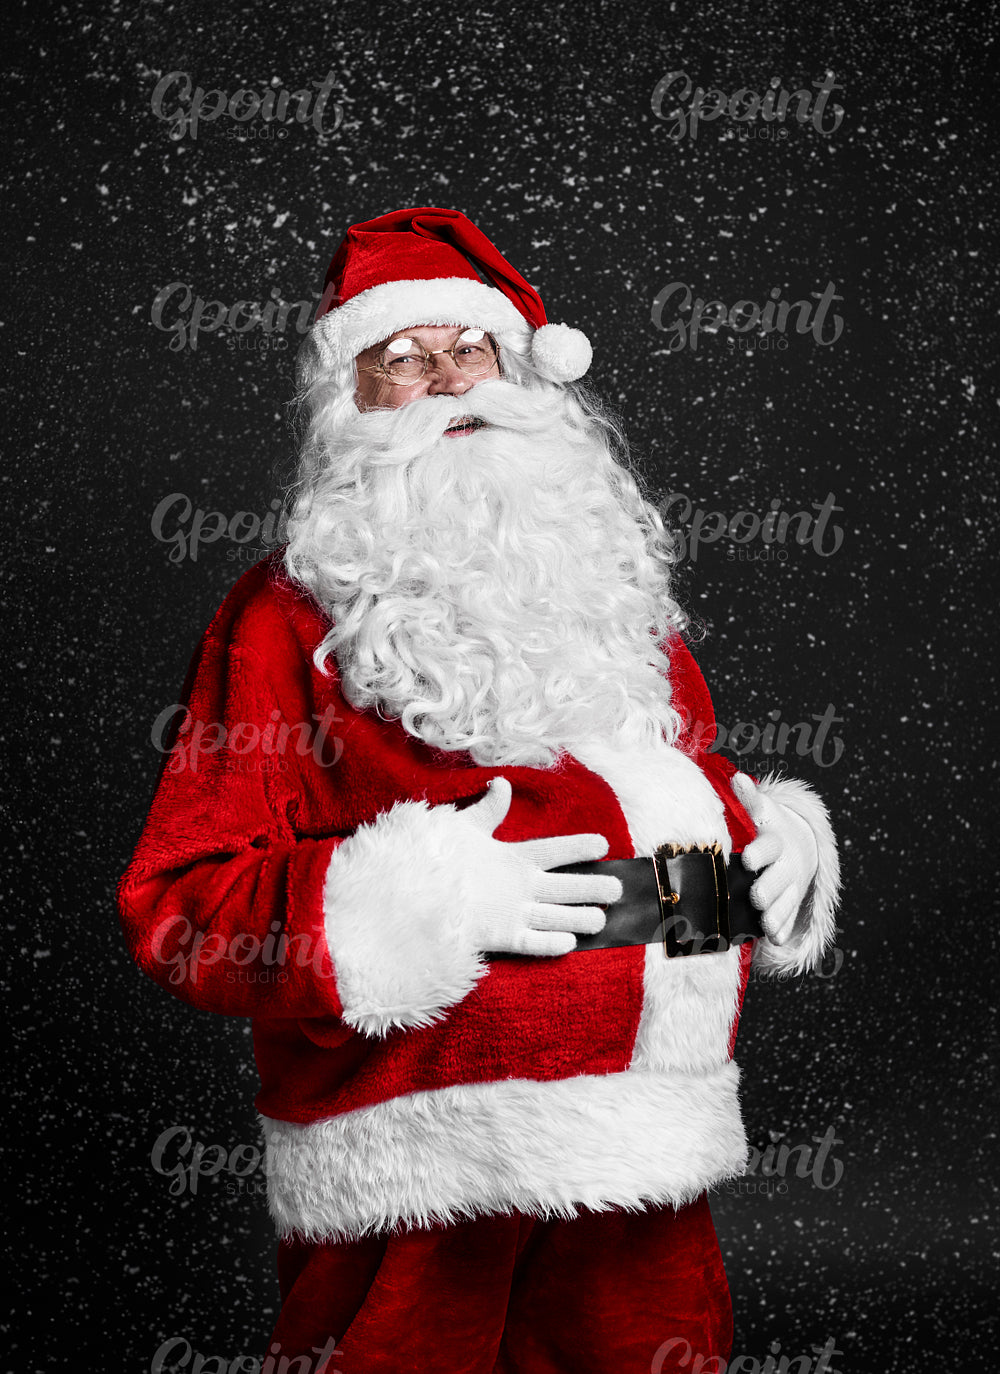 Cheerful santa claus touching his belly among snow falling